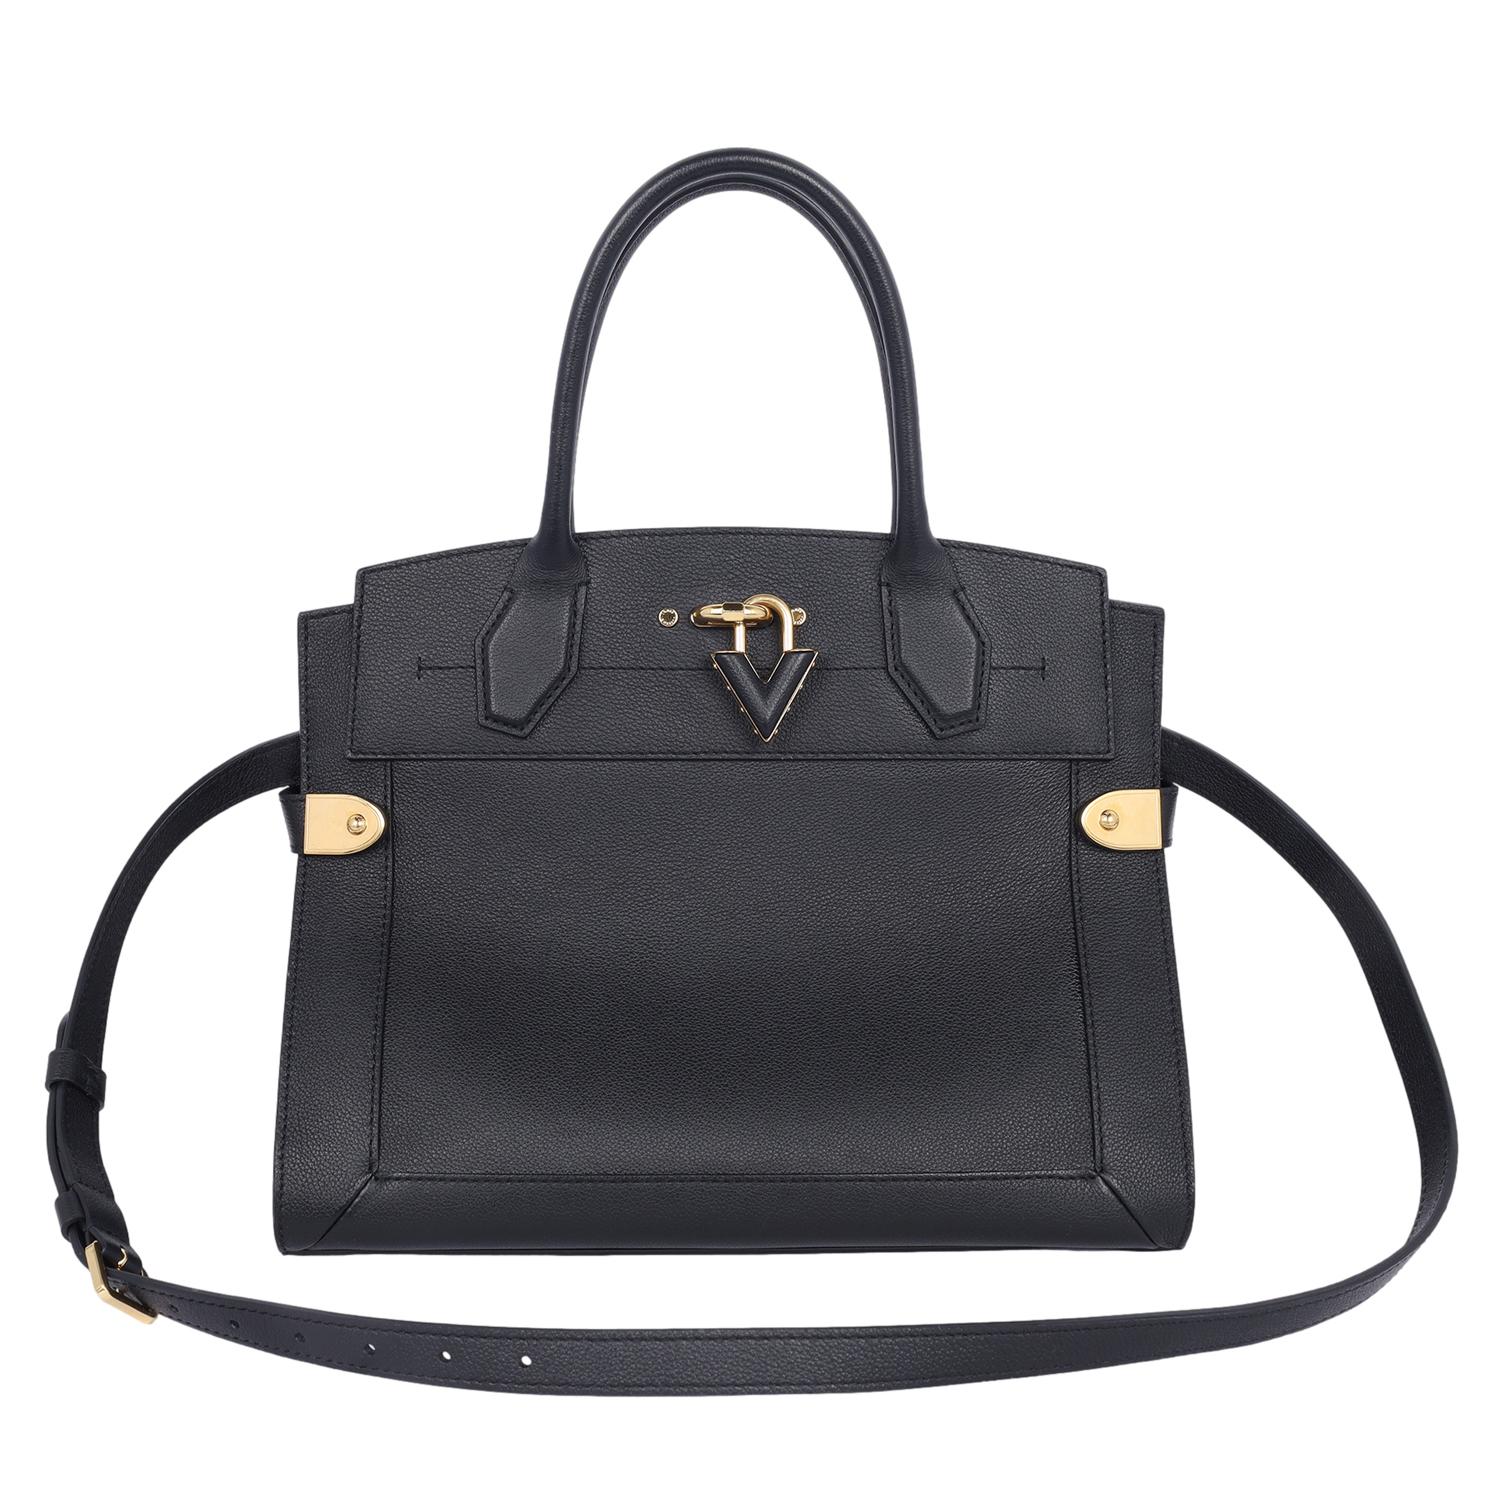 Authentic, pre-loved Louis Vuitton Black Steamer MM in grained calfskin leather. Features a structured body, turn-lock closure with a “V” padlock, and gold-finish angle brackets that adjust the bag’s width, top handles with removable strap. The